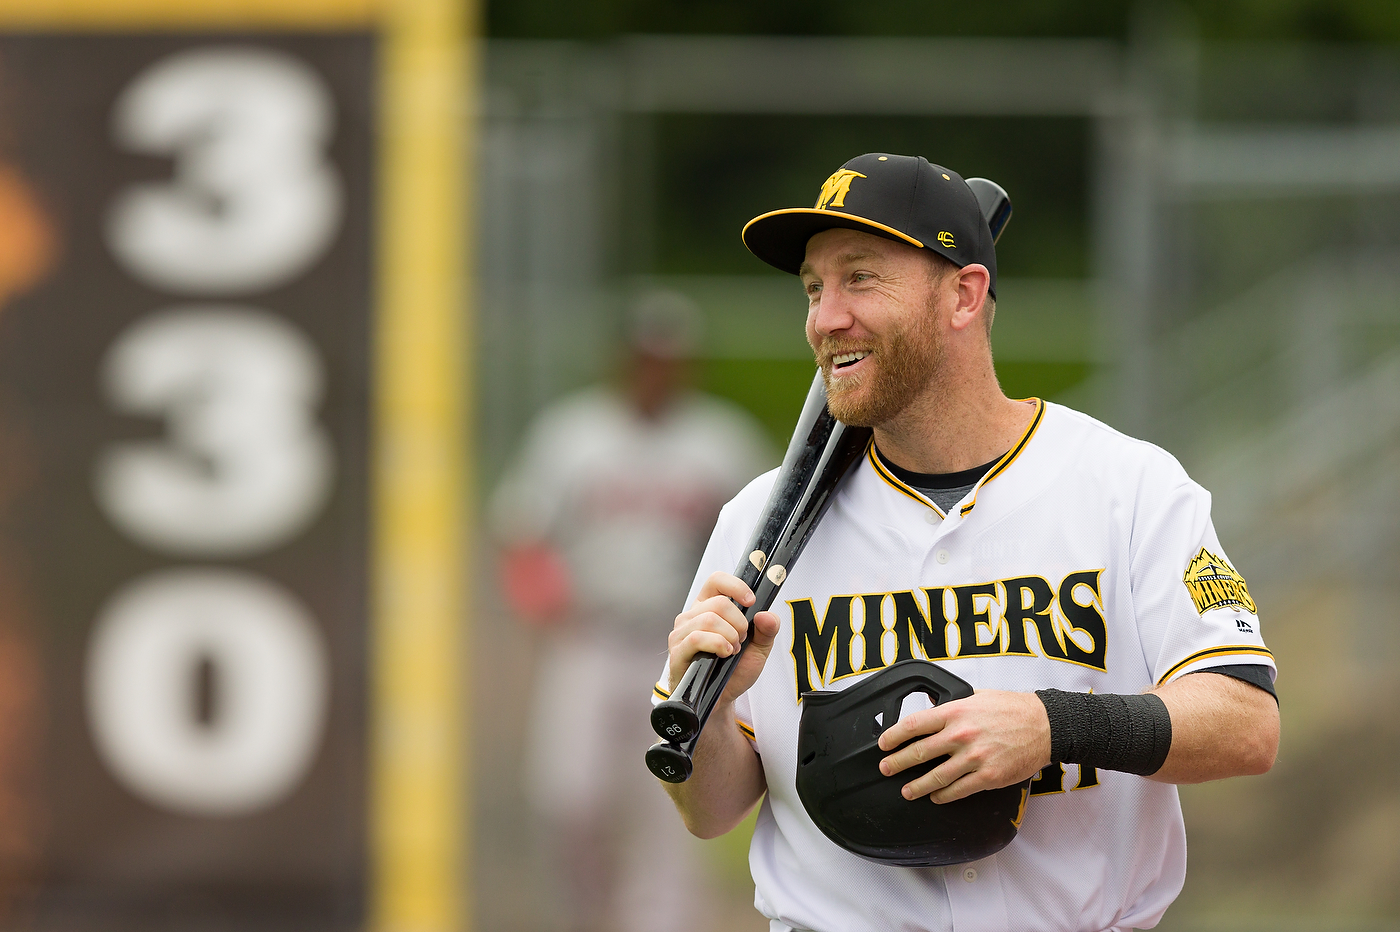 Ex-Yankees, Mets, Rutgers star Todd Frazier gets back to N.J. roots